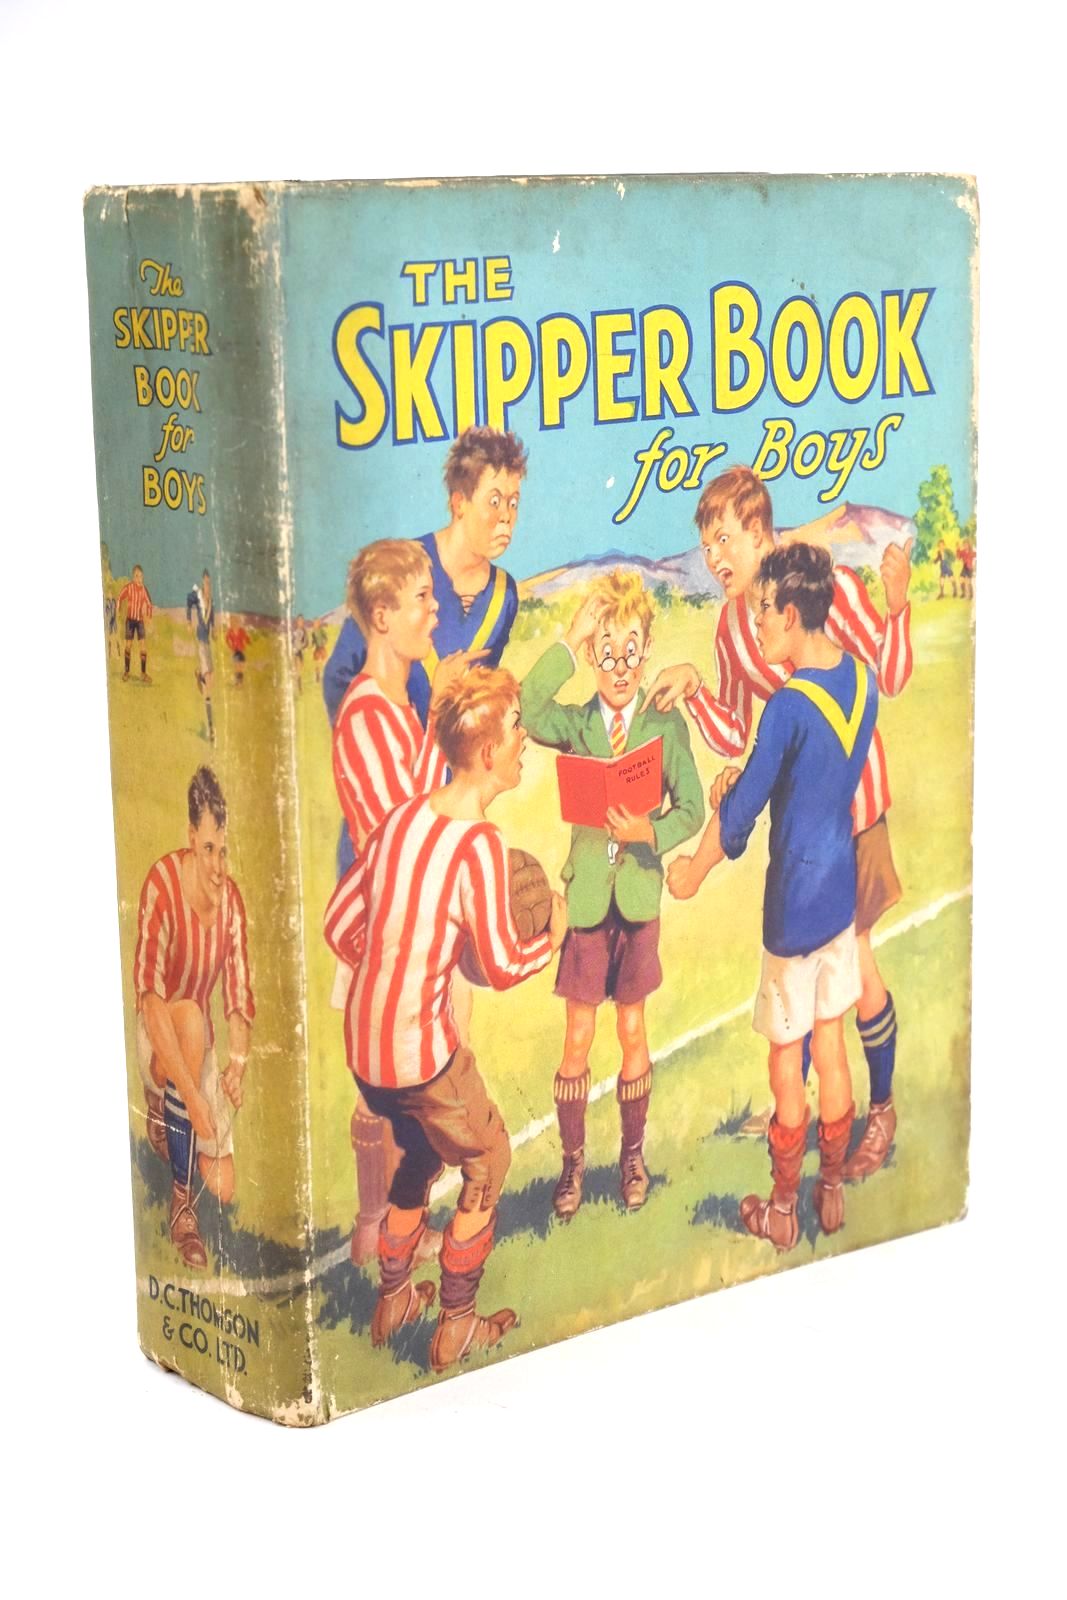 Photo of THE SKIPPER BOOK FOR BOYS 1935 written by Kaye, Crawford et al, illustrated by Various, published by D.C. Thomson &amp; Co Ltd. (STOCK CODE: 1324790)  for sale by Stella & Rose's Books